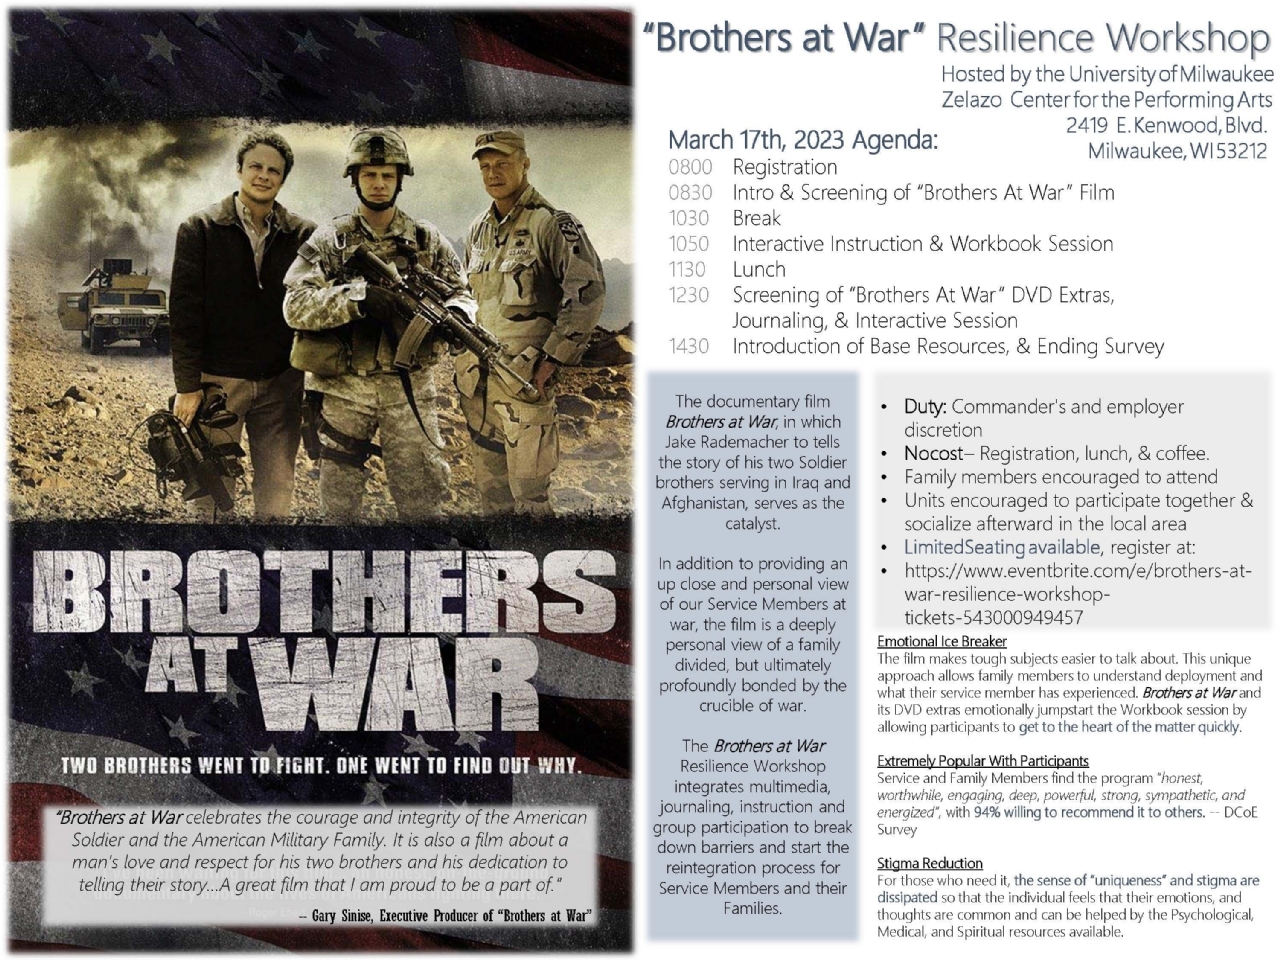 Brothers at War Resilience Workshop